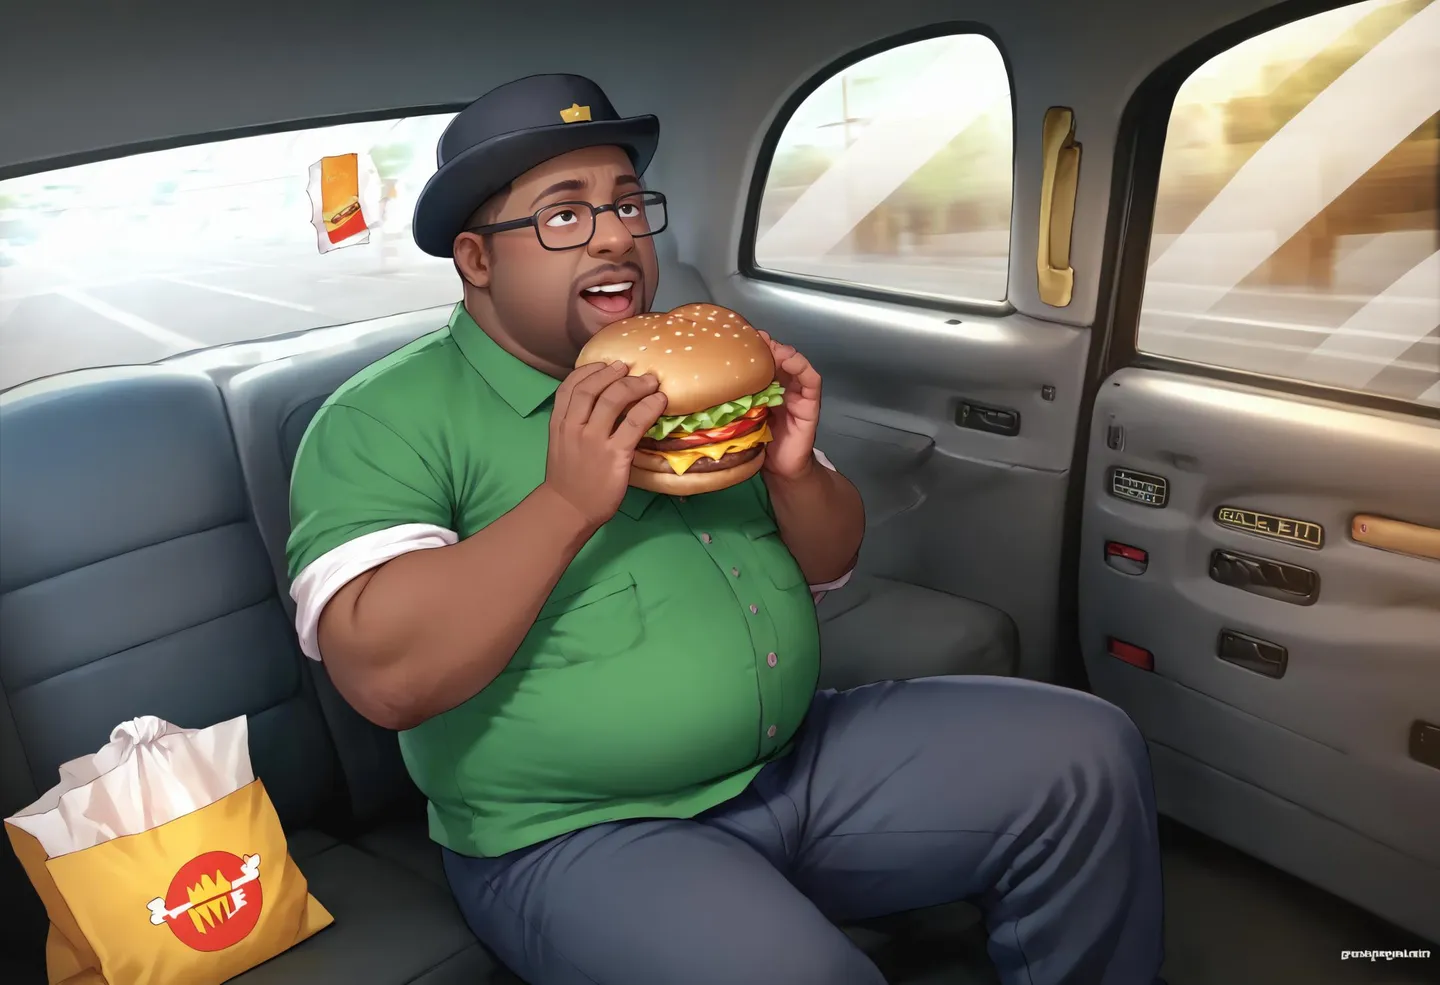 A realistic AI generated image of a man in a green shirt and hat eating a large burger while sitting in the back seat of a taxi, with a bag of fries next to him. Created using Stable Diffusion.